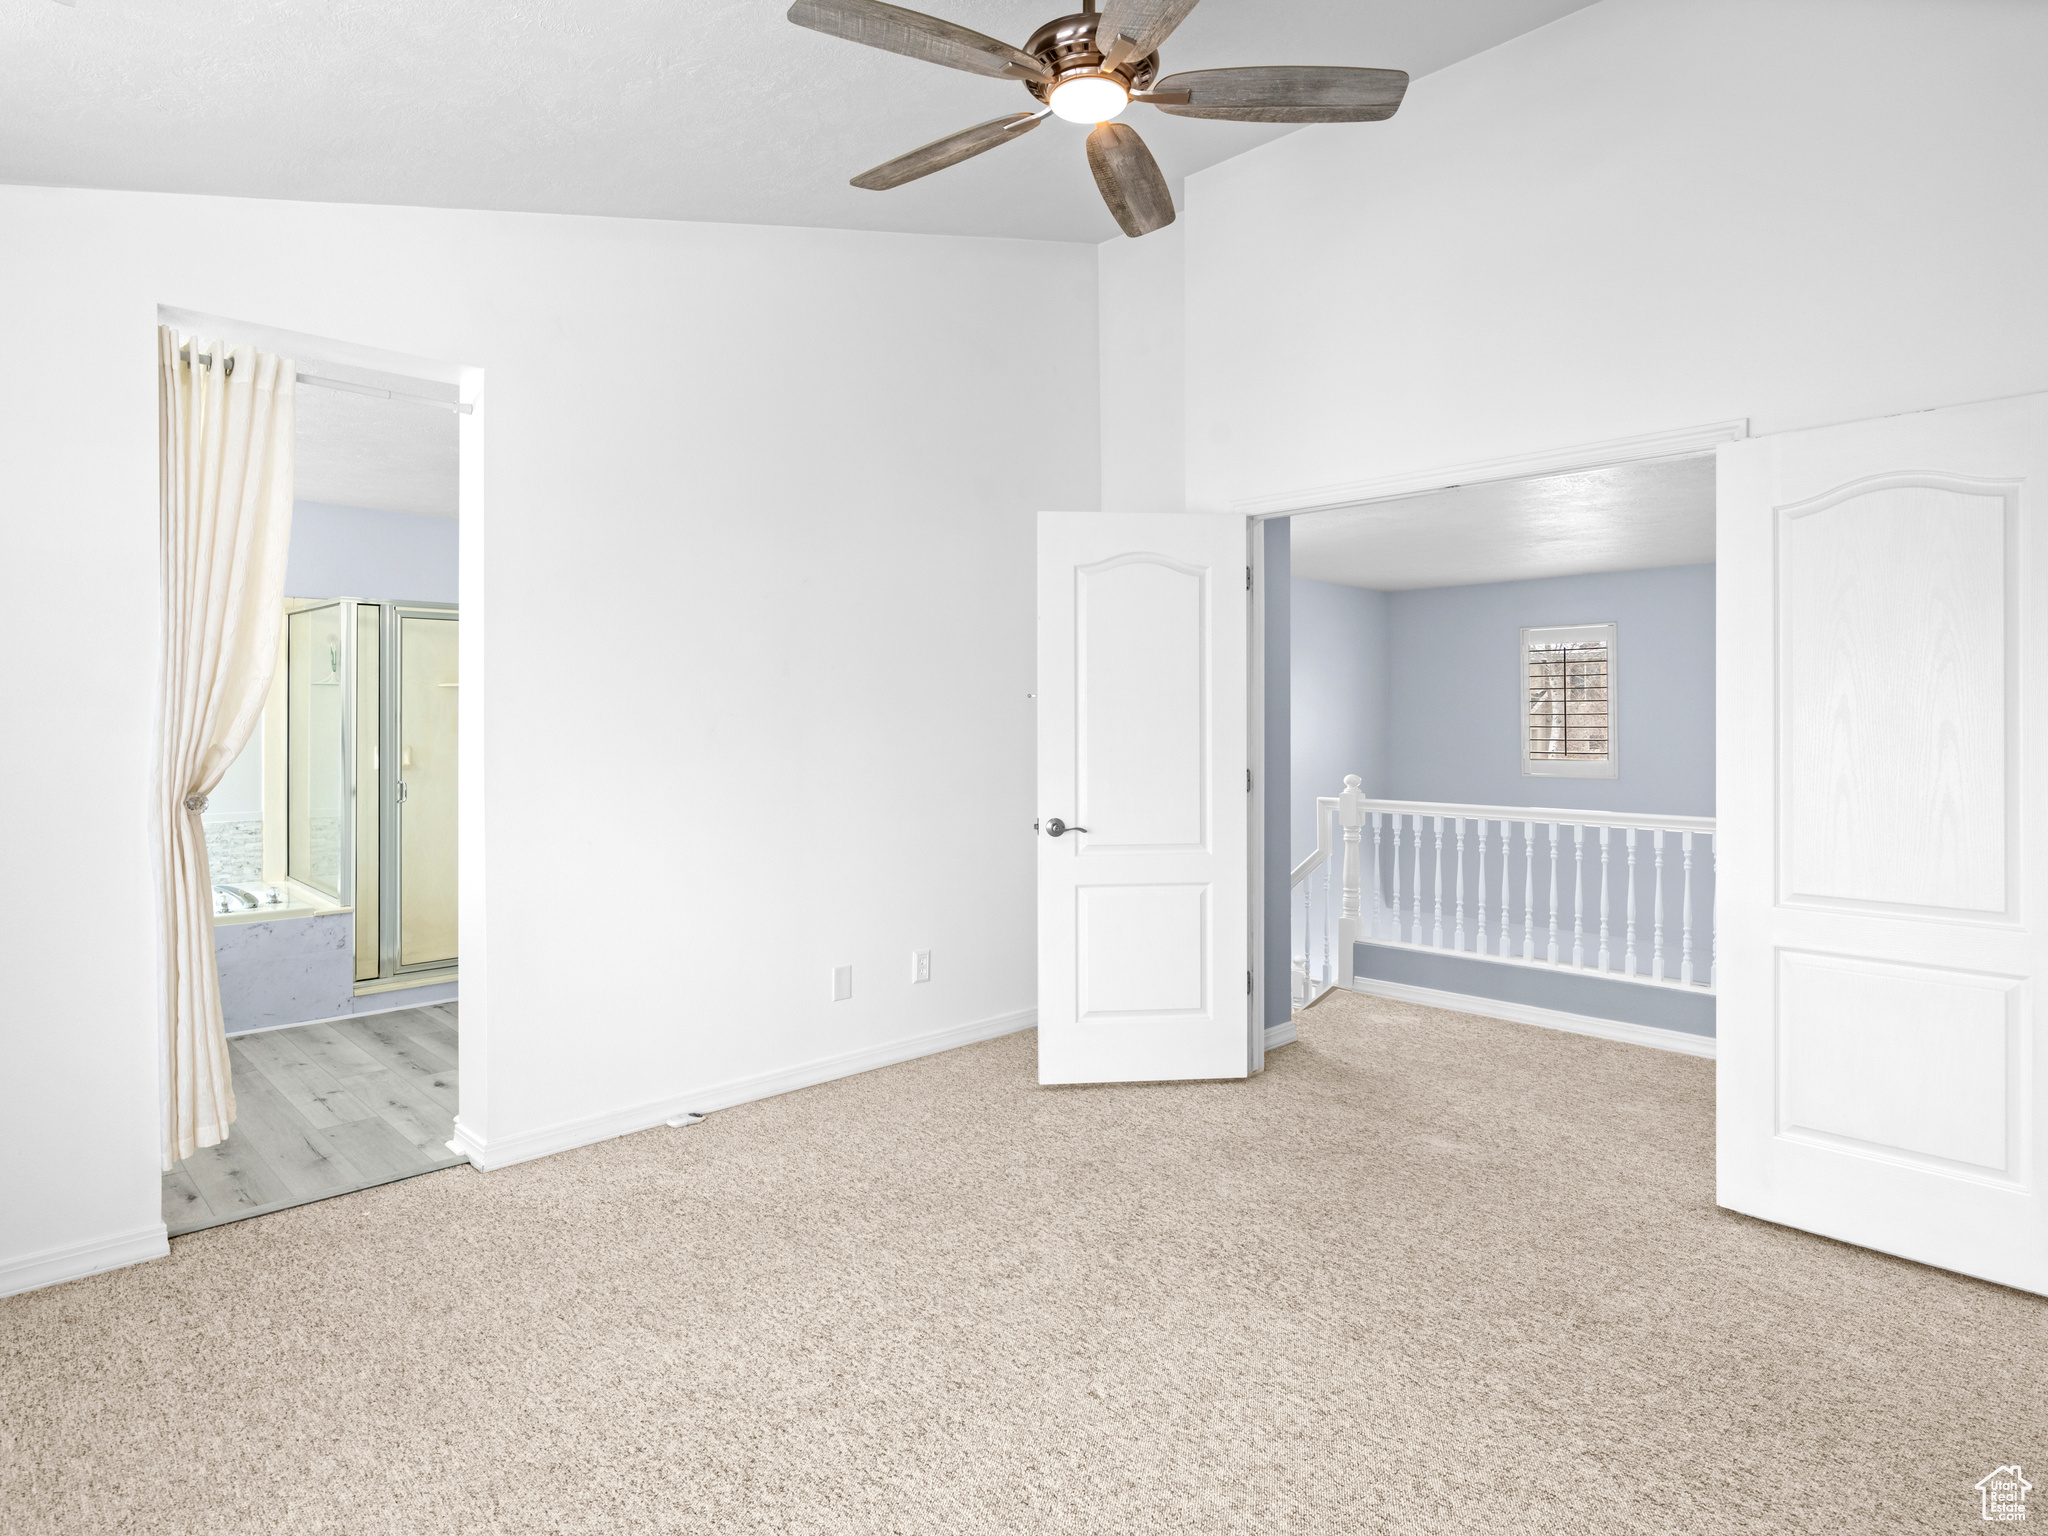 Unfurnished room featuring a wealth of natural light, ceiling fan, light colored carpet, and vaulted ceiling